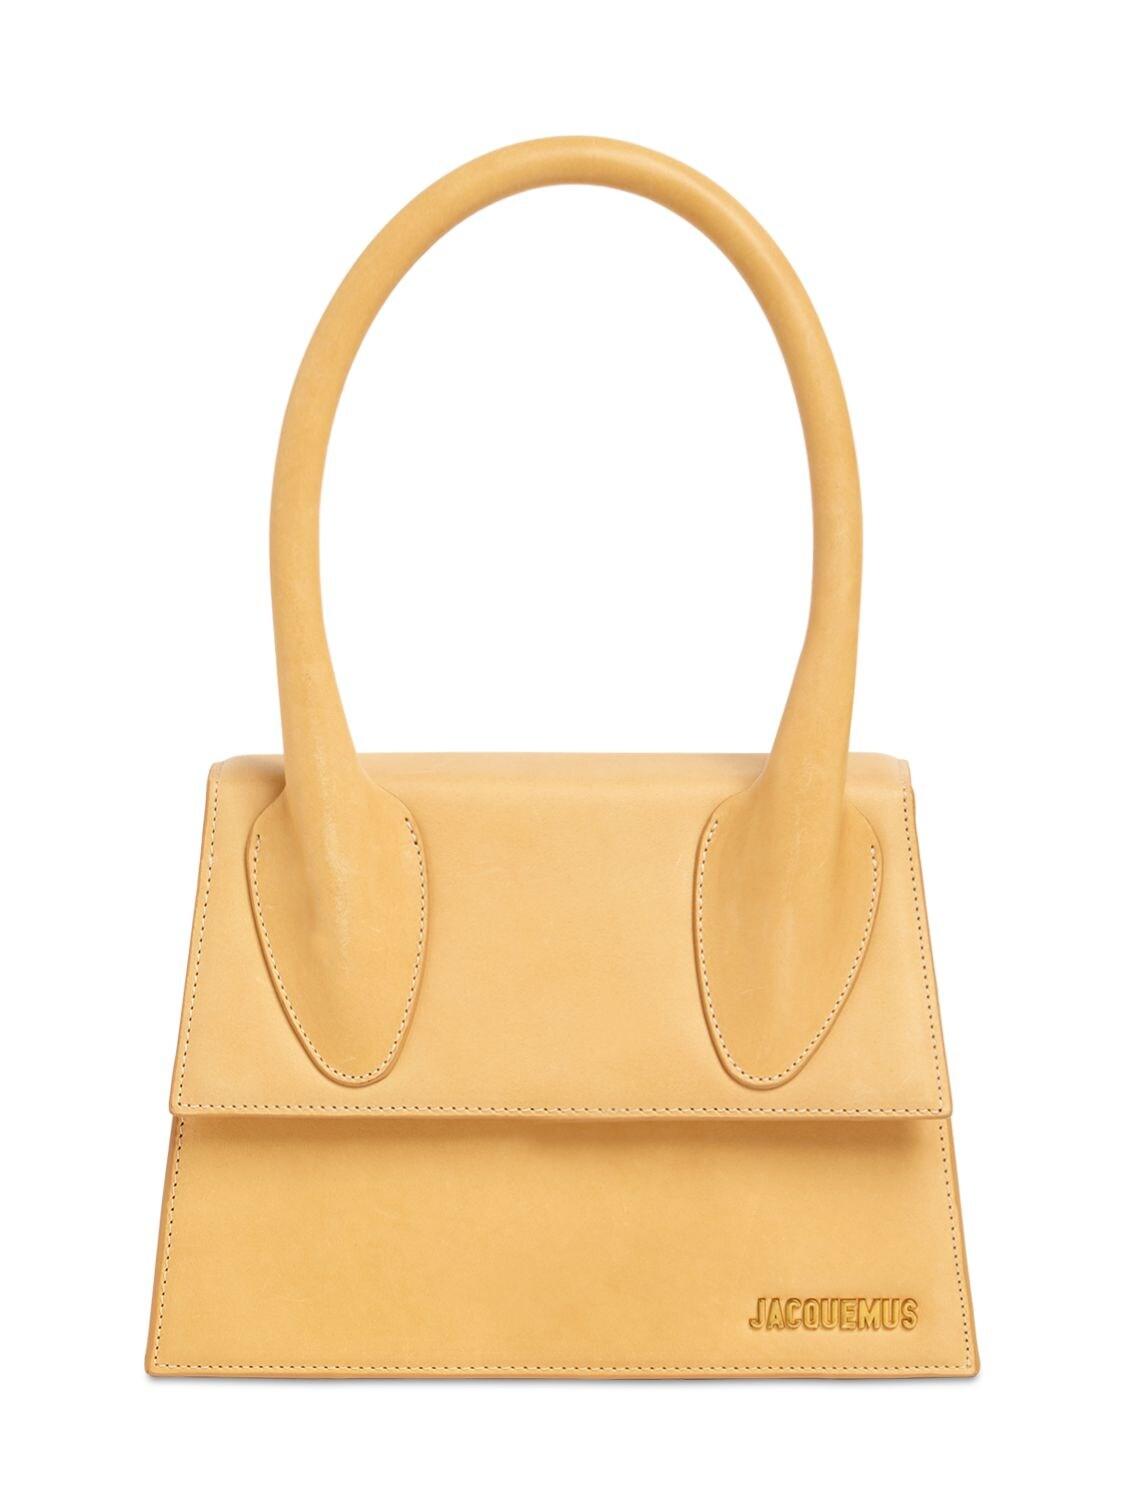 Jacquemus Le Grand Chiquito Suede Bag in Light Brown (Brown) - Lyst